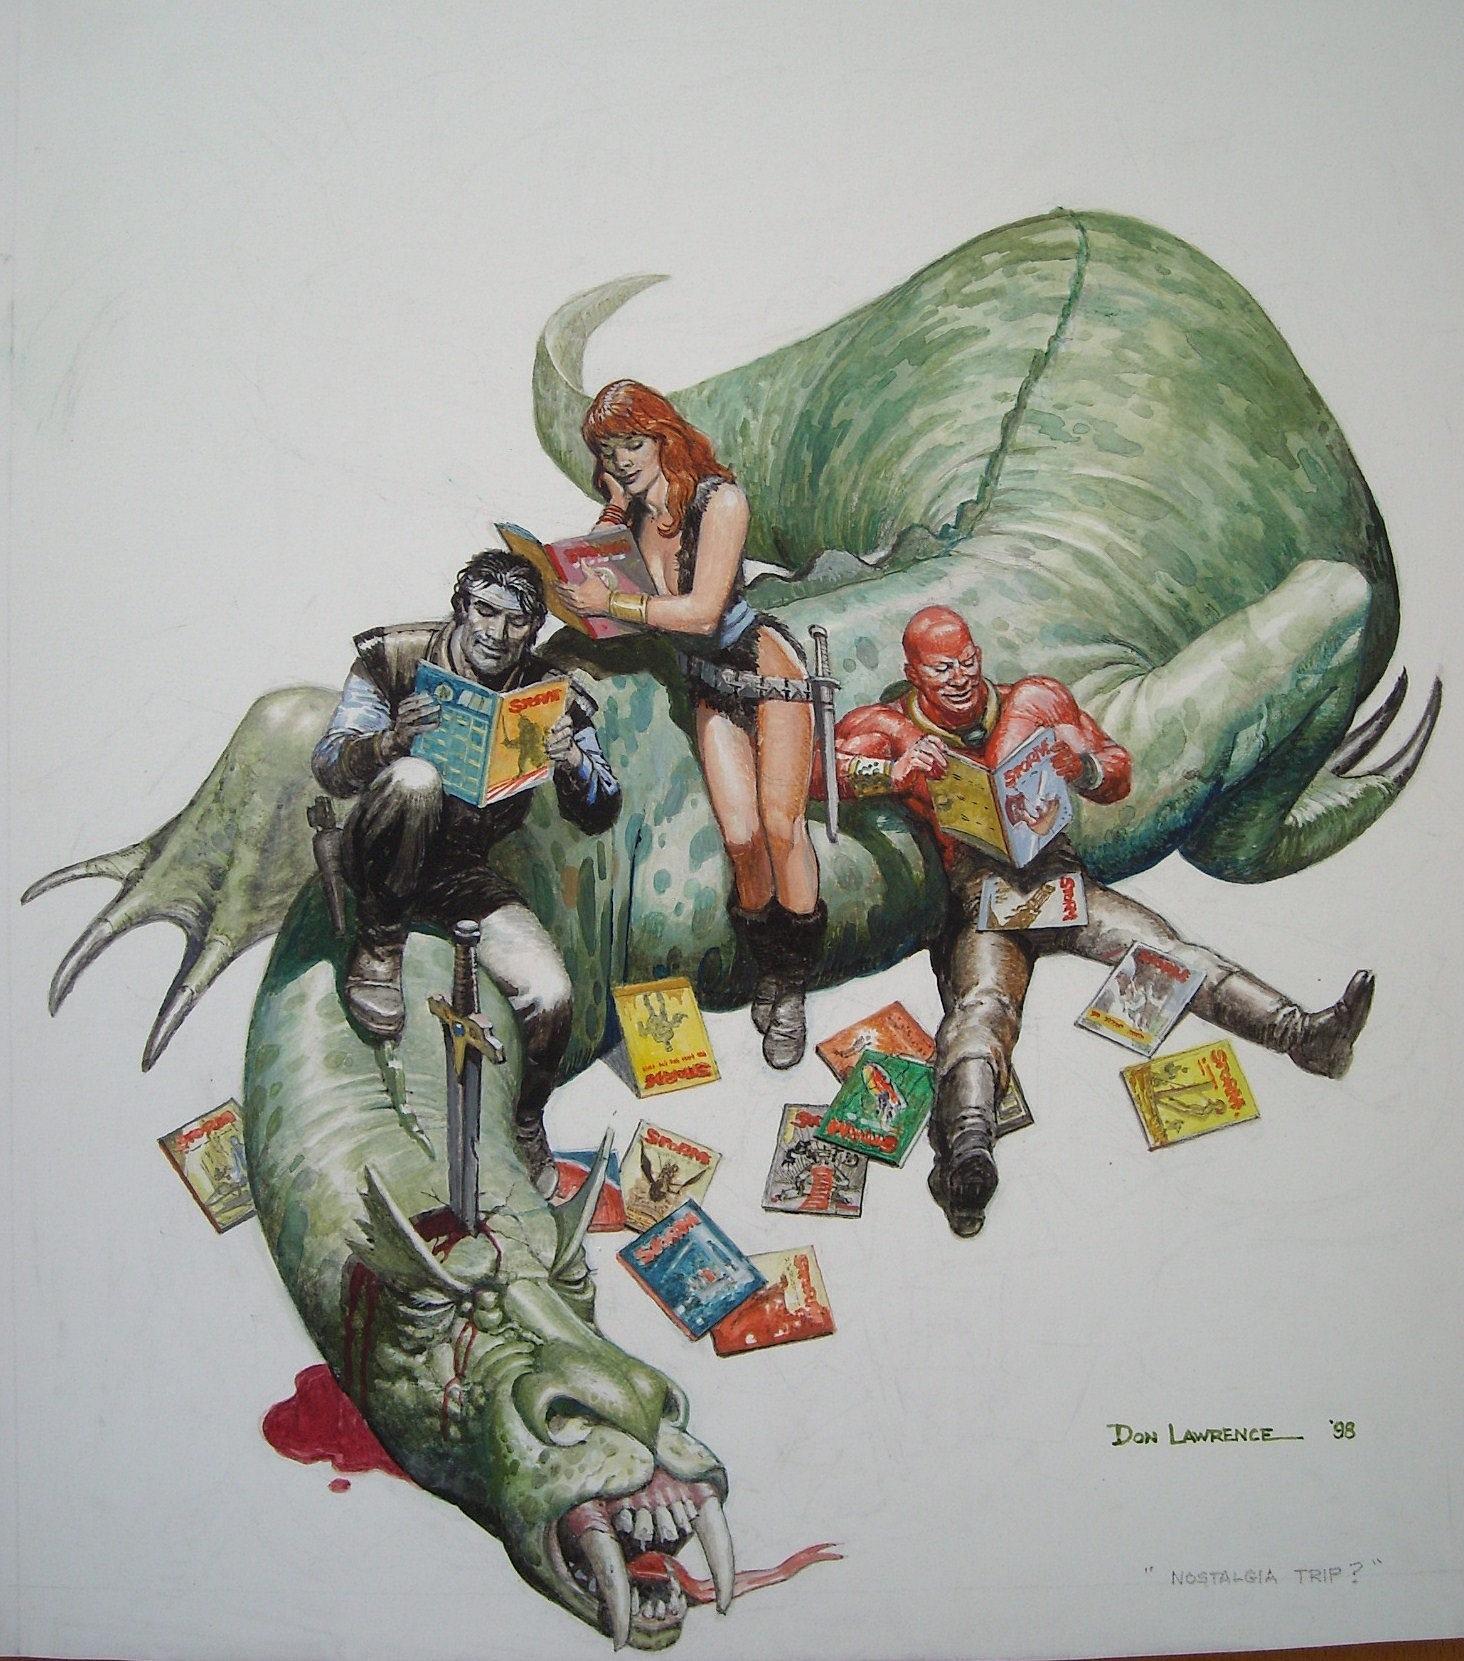 At the convention 101 in 1976, artist Don Lawrence met with Bosnian comic p...